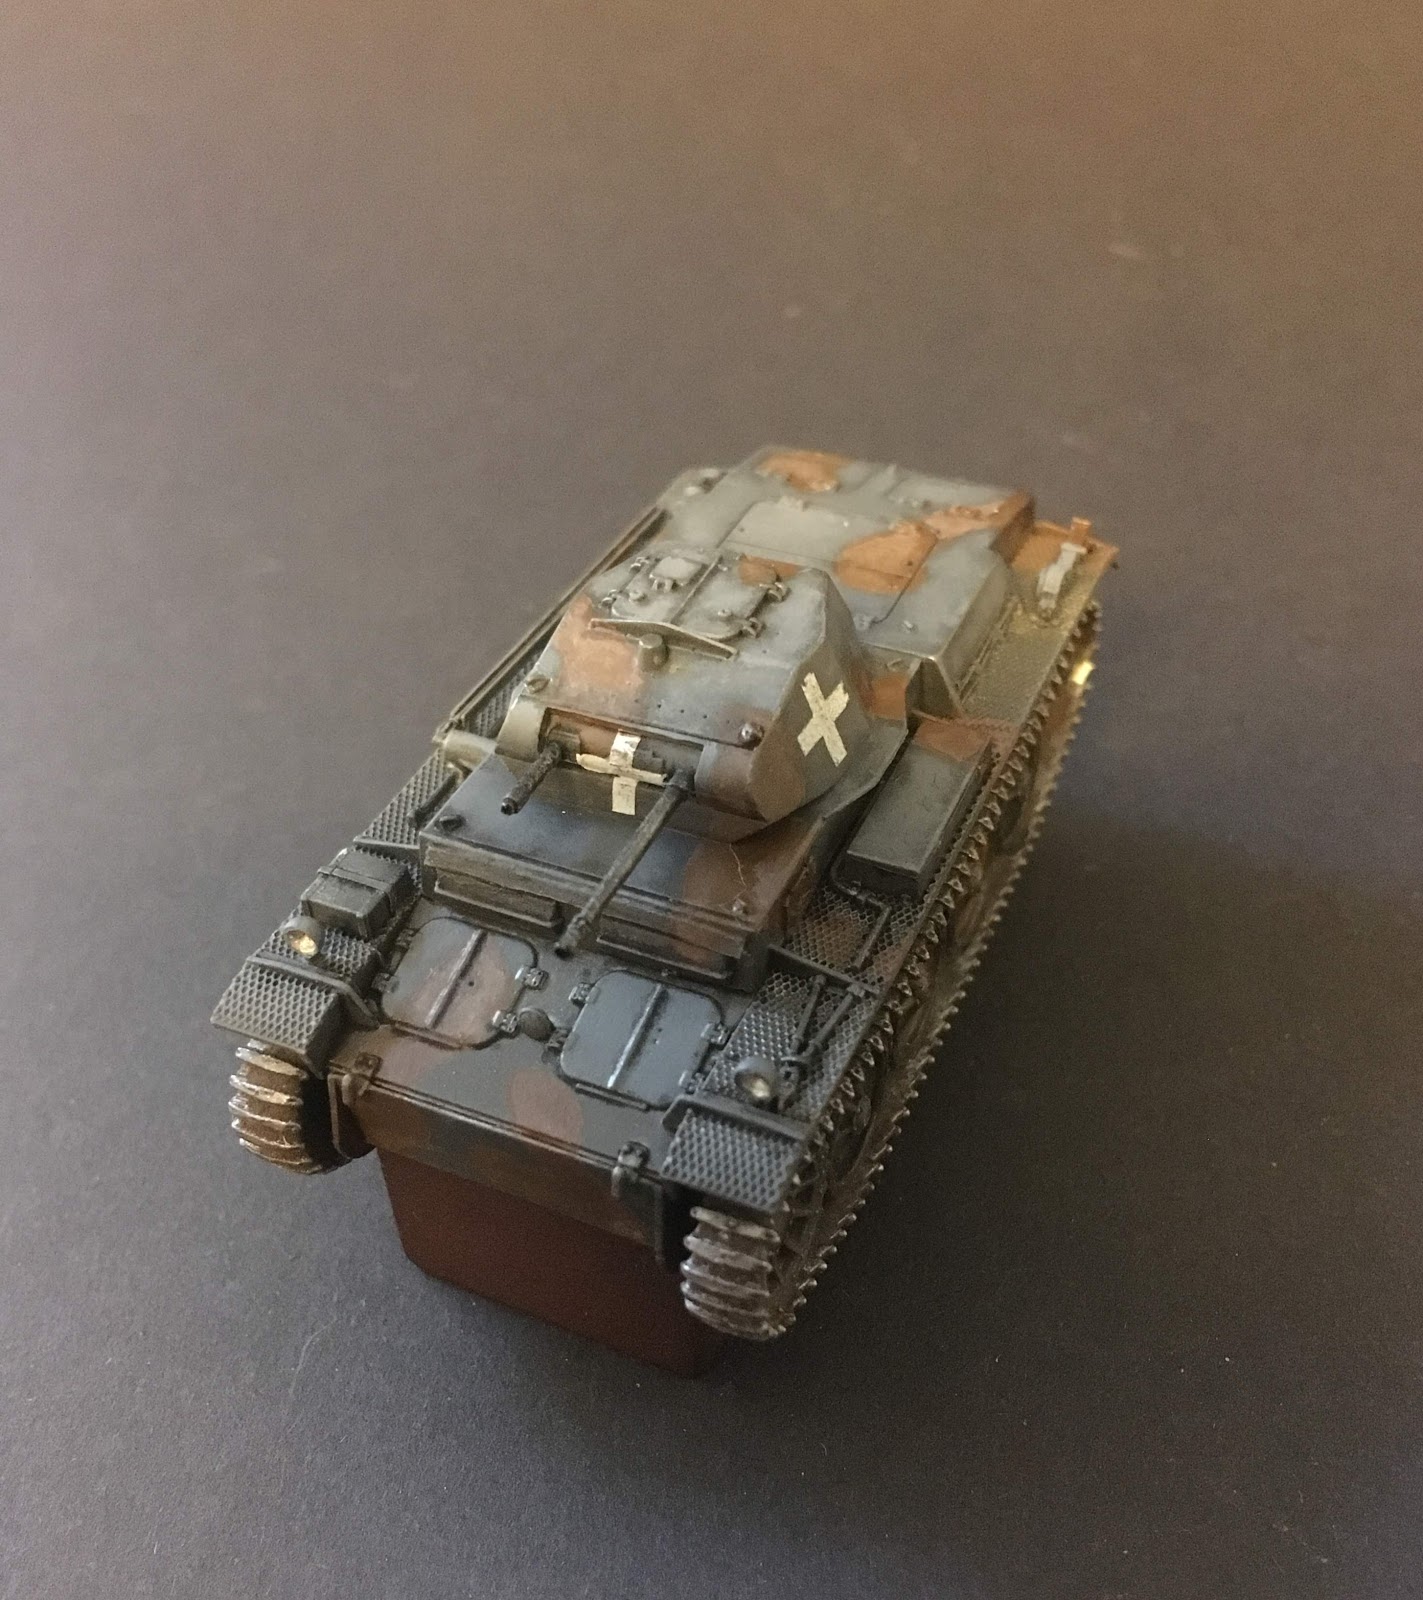 Finished Product S-Model CP0081 1/72 WWII German Pz.Kpfw.II Ausf.C Car No 312 